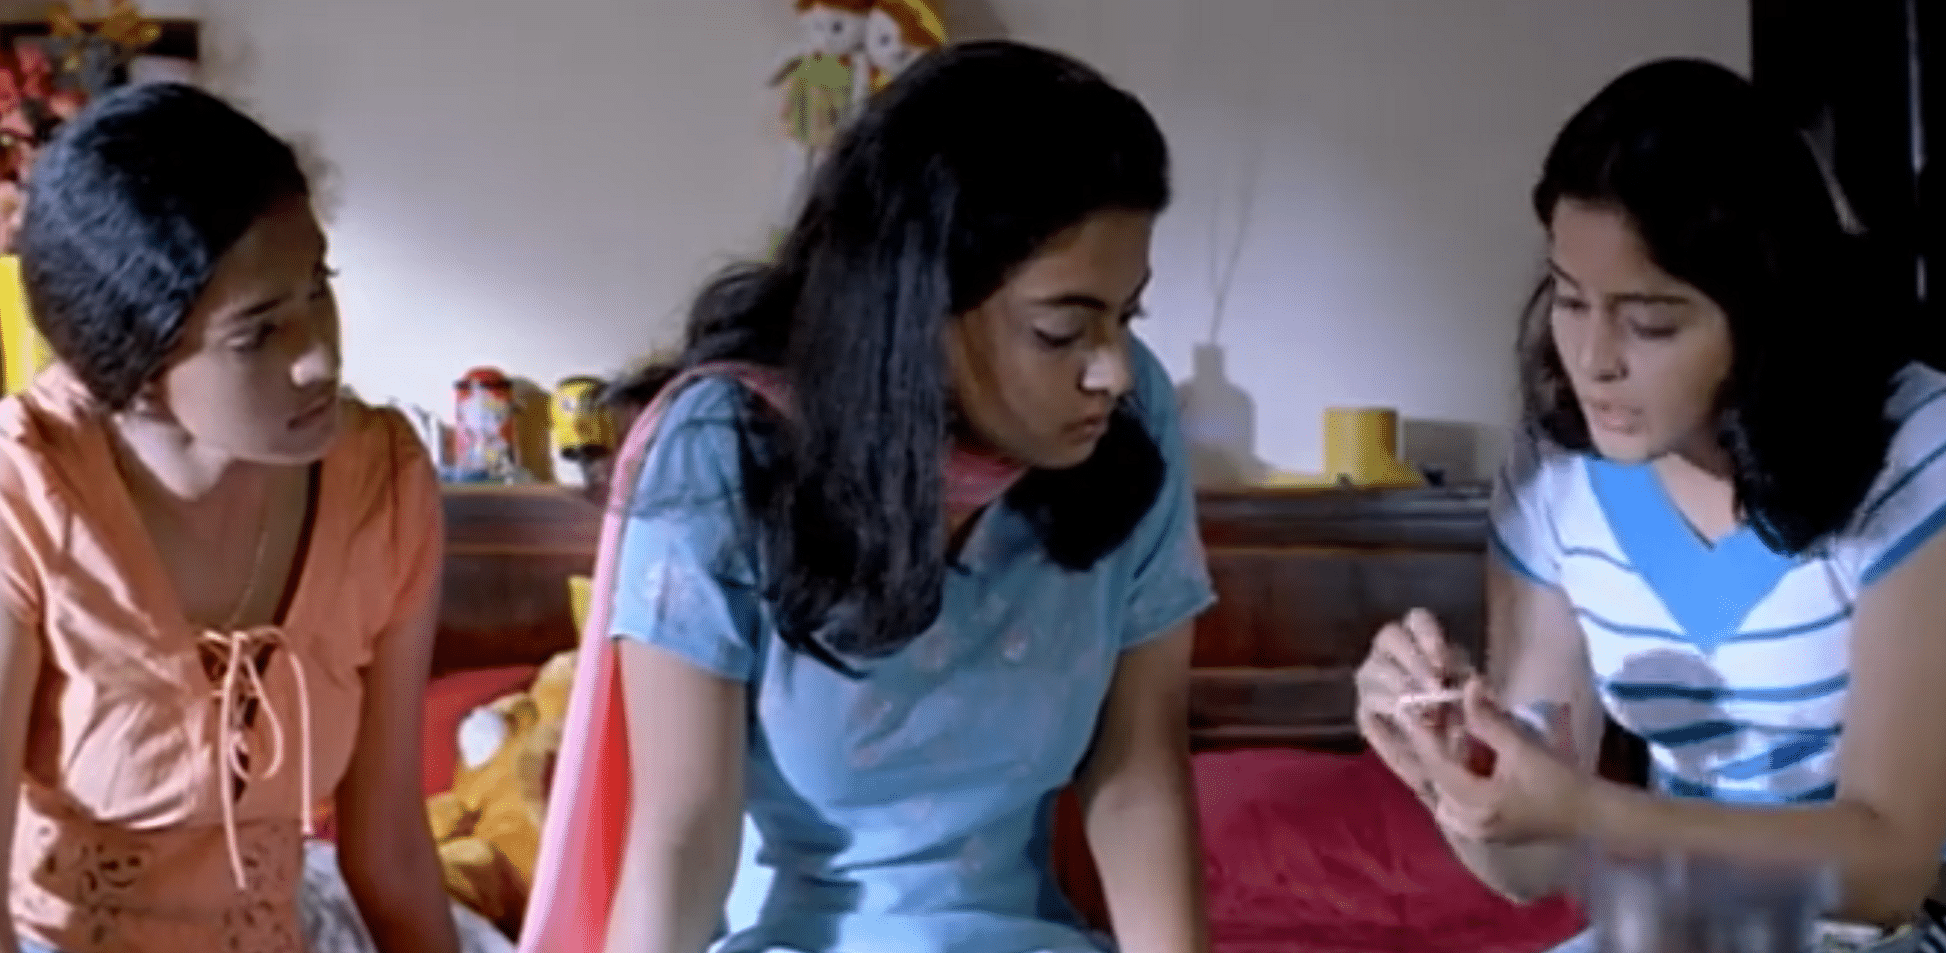 The 2006 Malayalam movie 'Notebook' shows the consequences of lack of access to safe abortions.